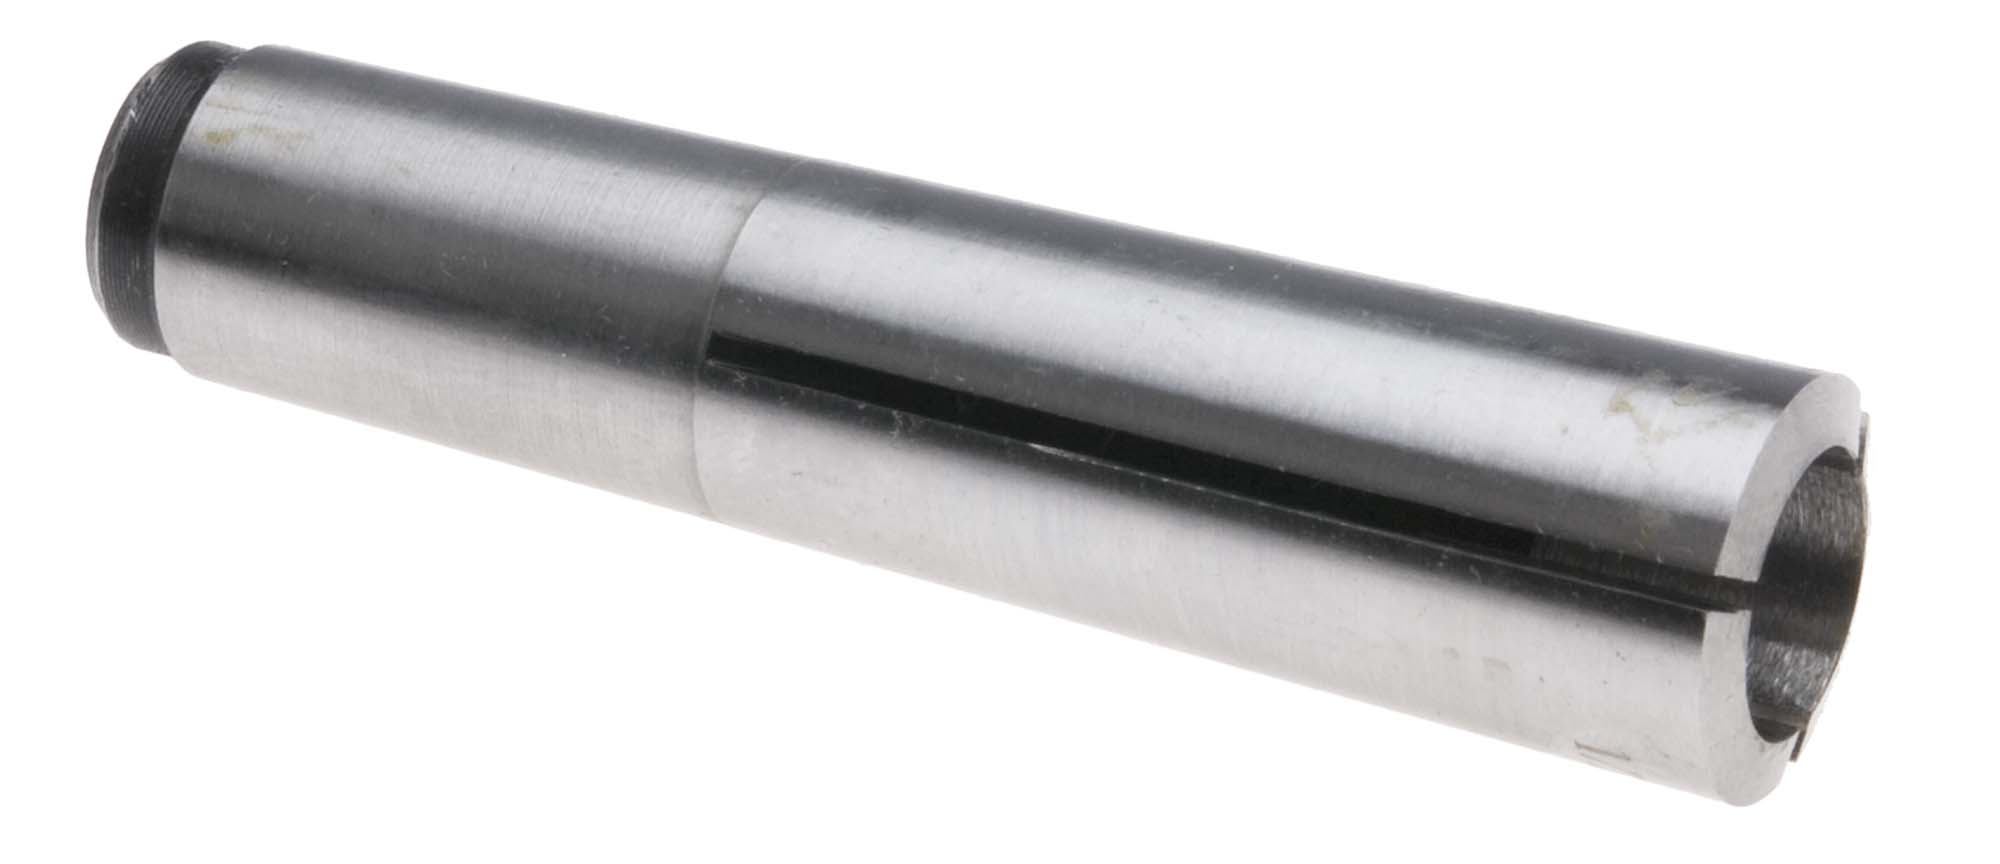 1/8" 7 B and S Taper Collet